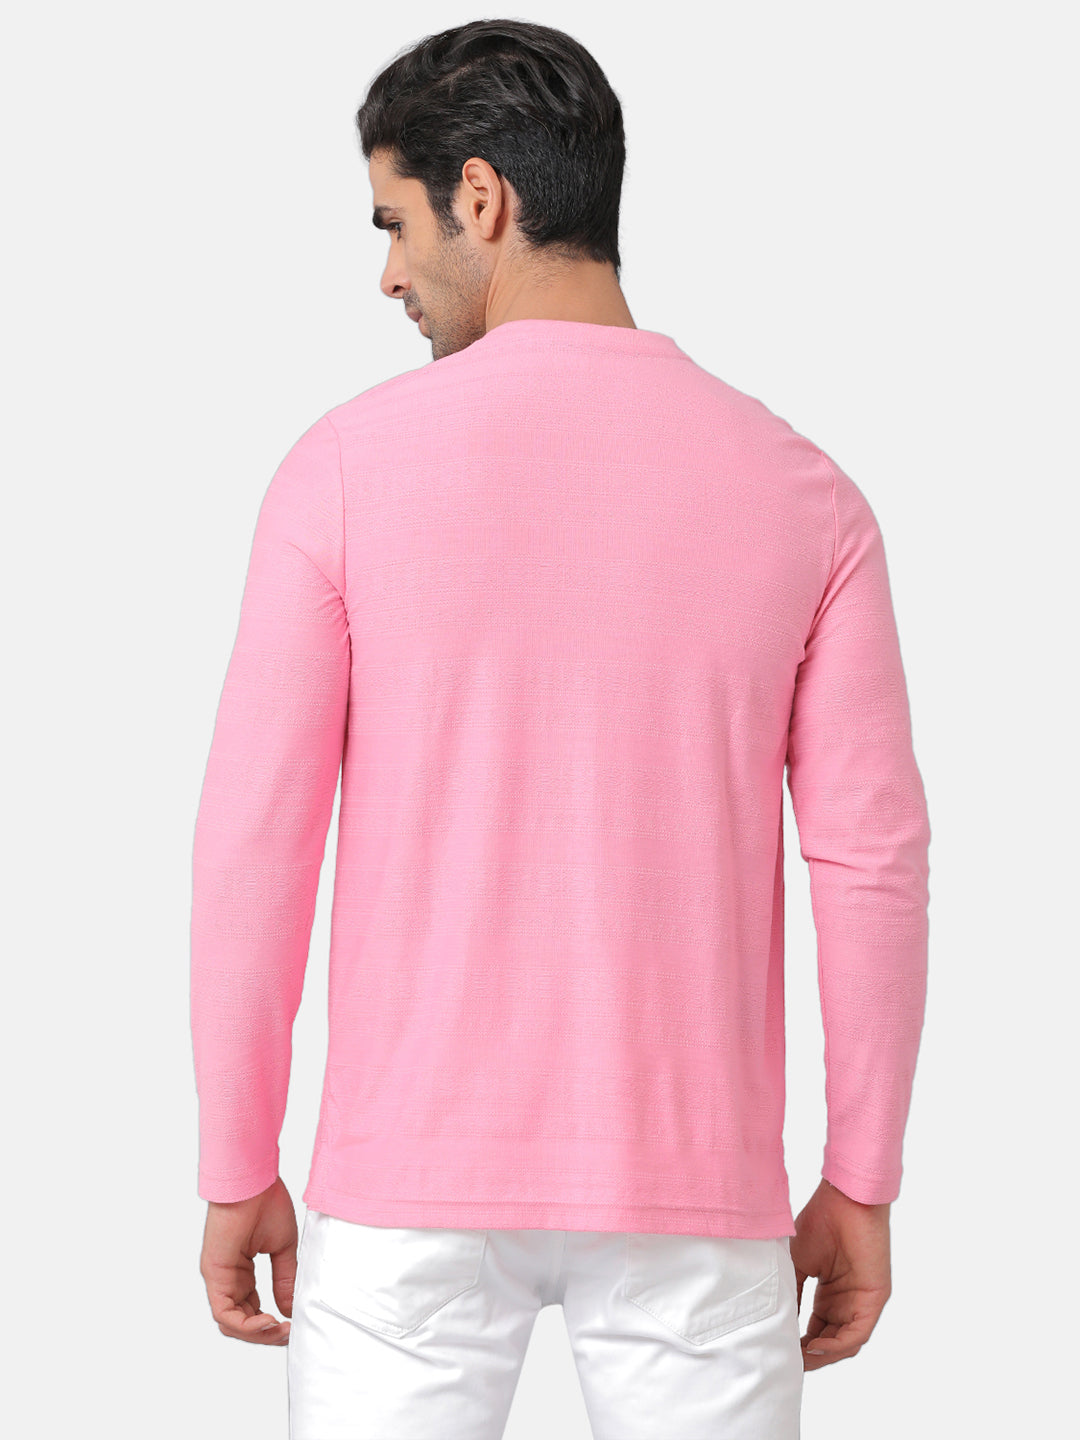 CP BRO Men's Cotton Solid Slim Fit Full Sleeve Round Neck Pink Color T-Shirt | Verno 312